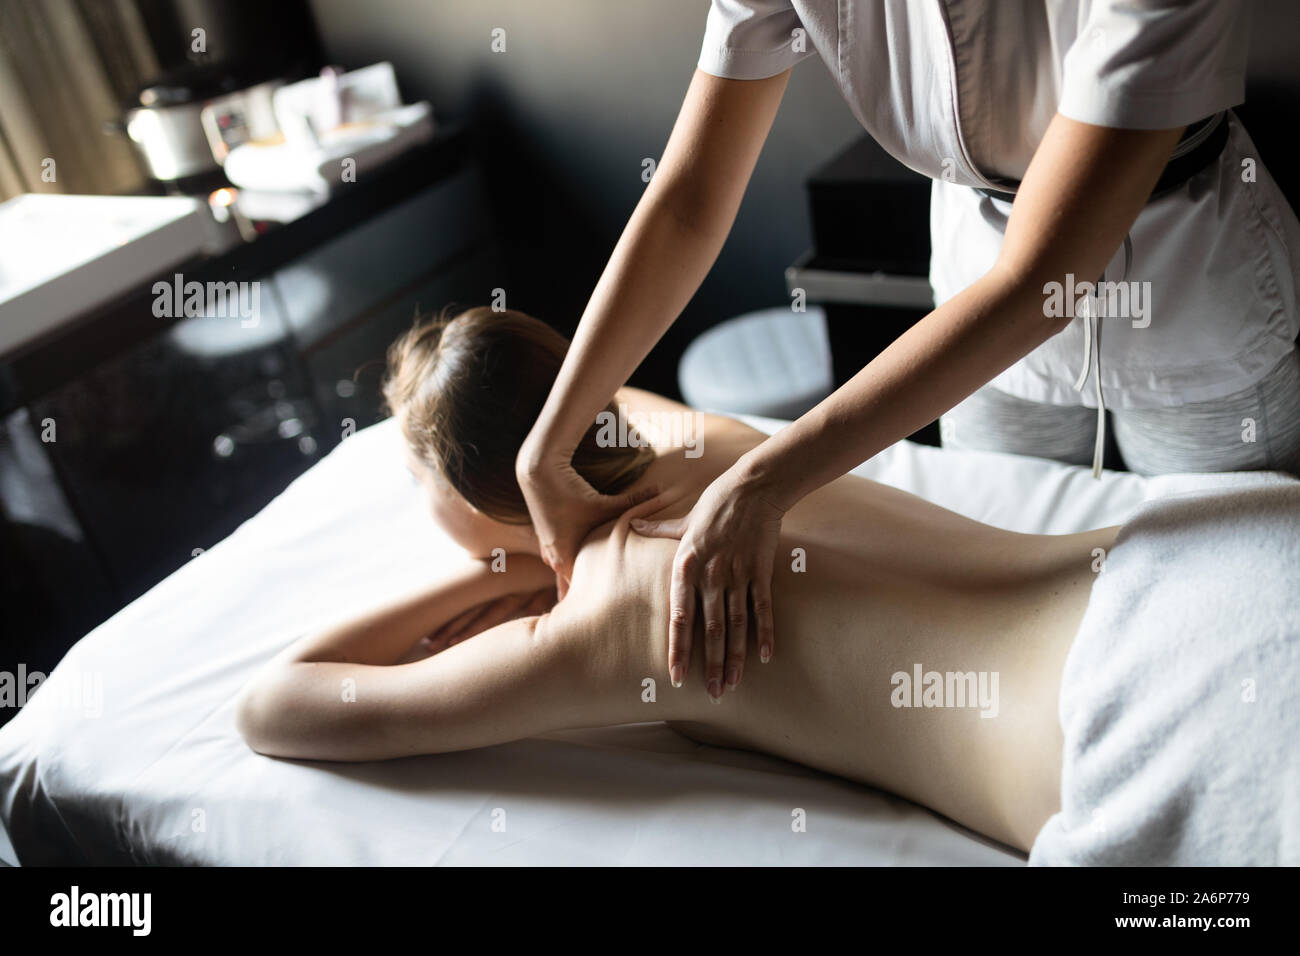 Masseur doing massage on female body in the spa salon. Beauty treatment concept. Stock Photo